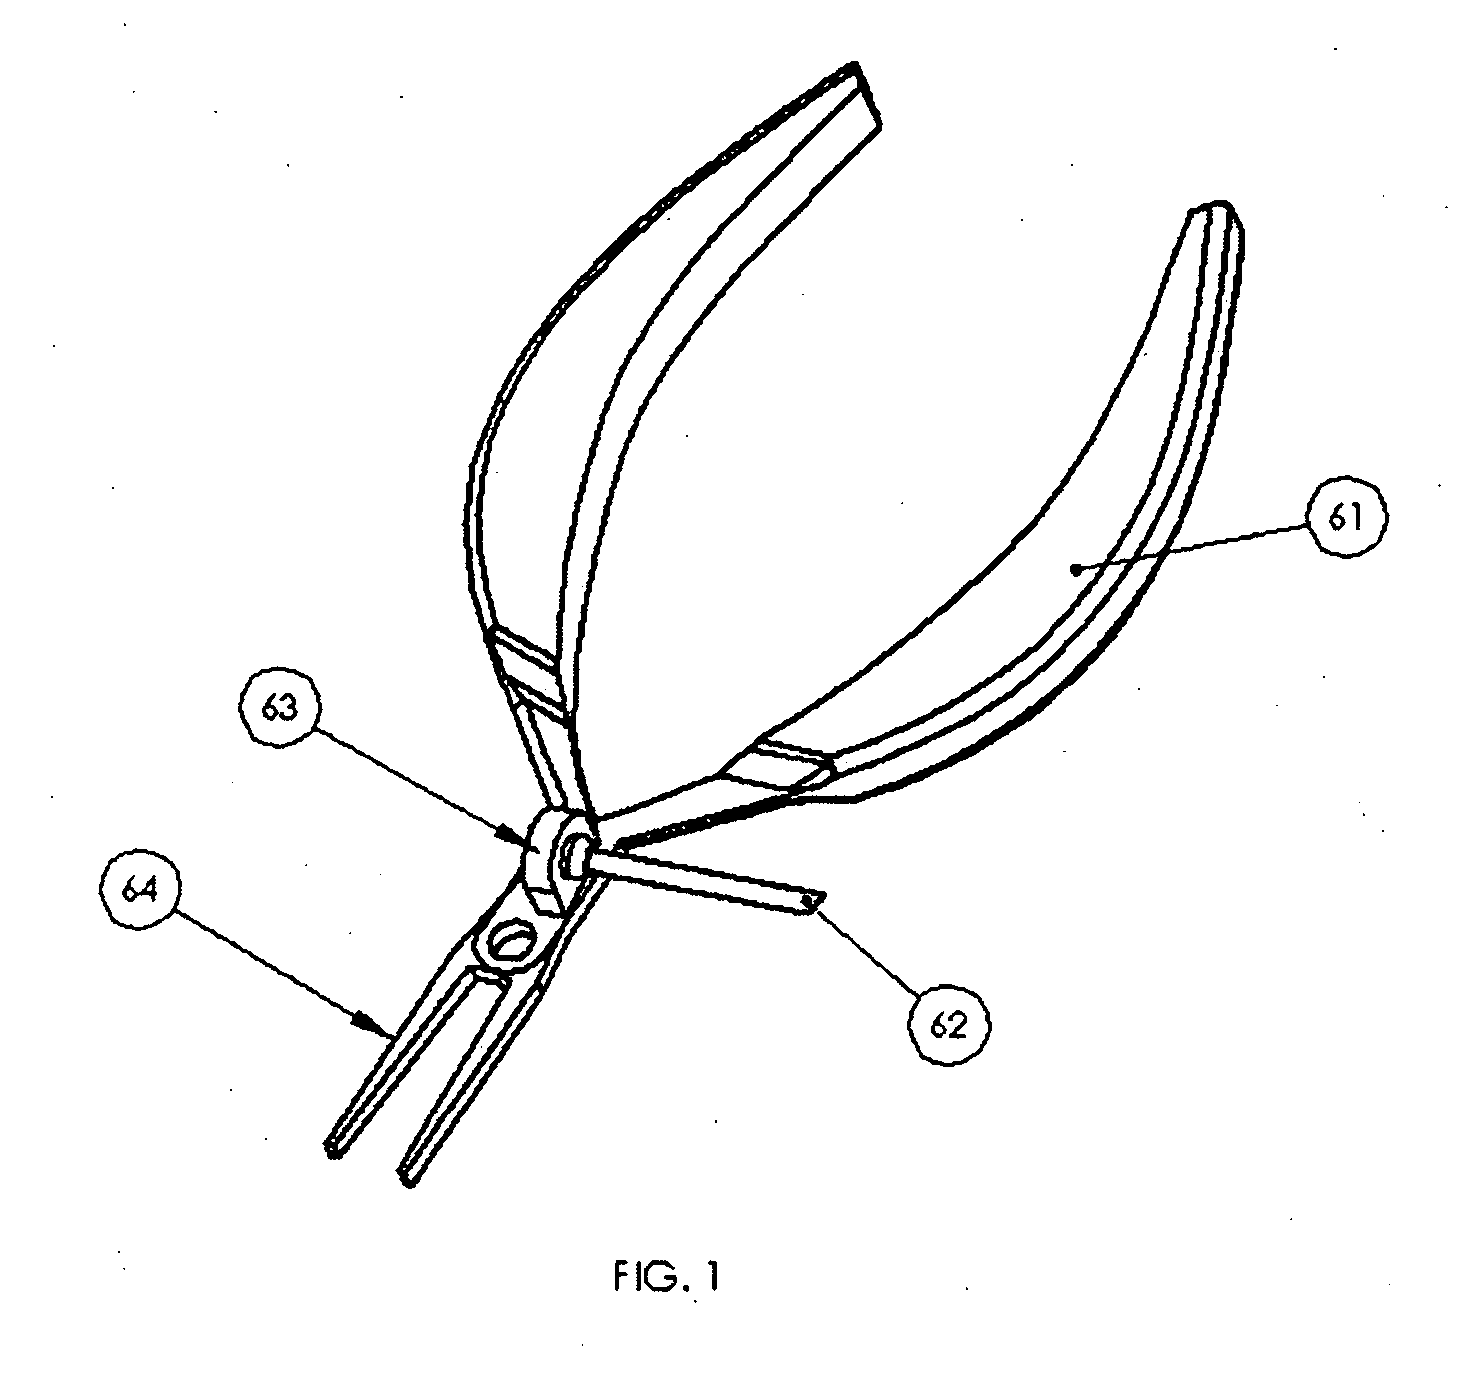 Apparatus and procedure for fish boning